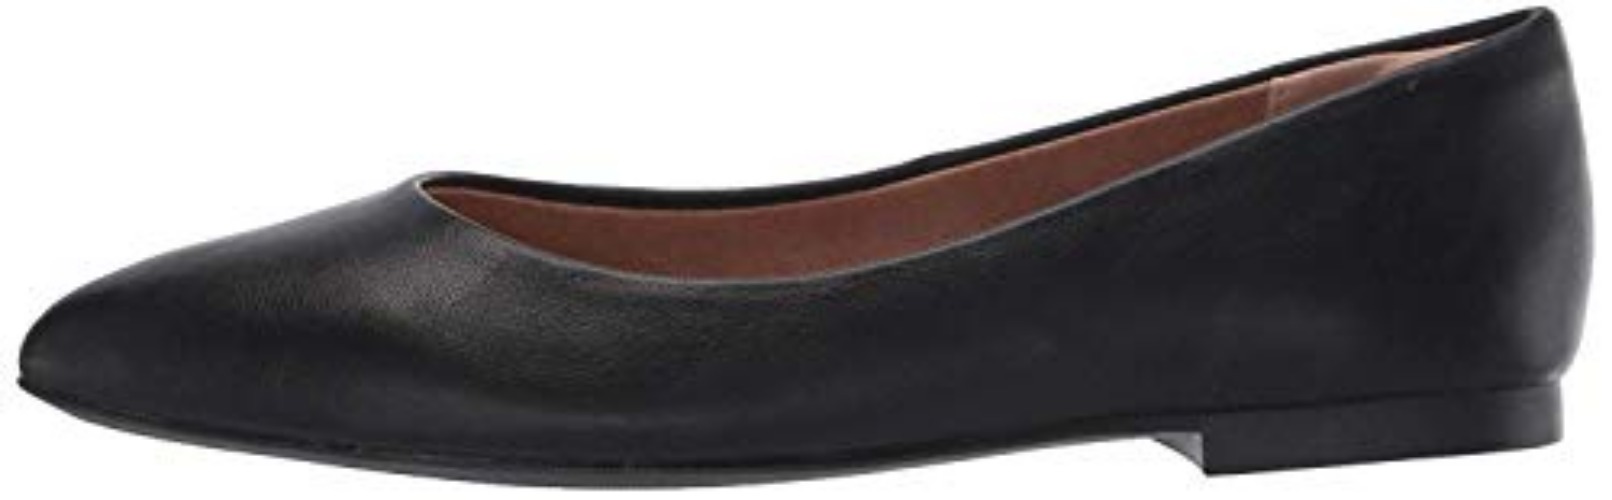 Amazon Essentials Women's Pointed-Toe Ballet Flat - 7 - Black Faux Leather